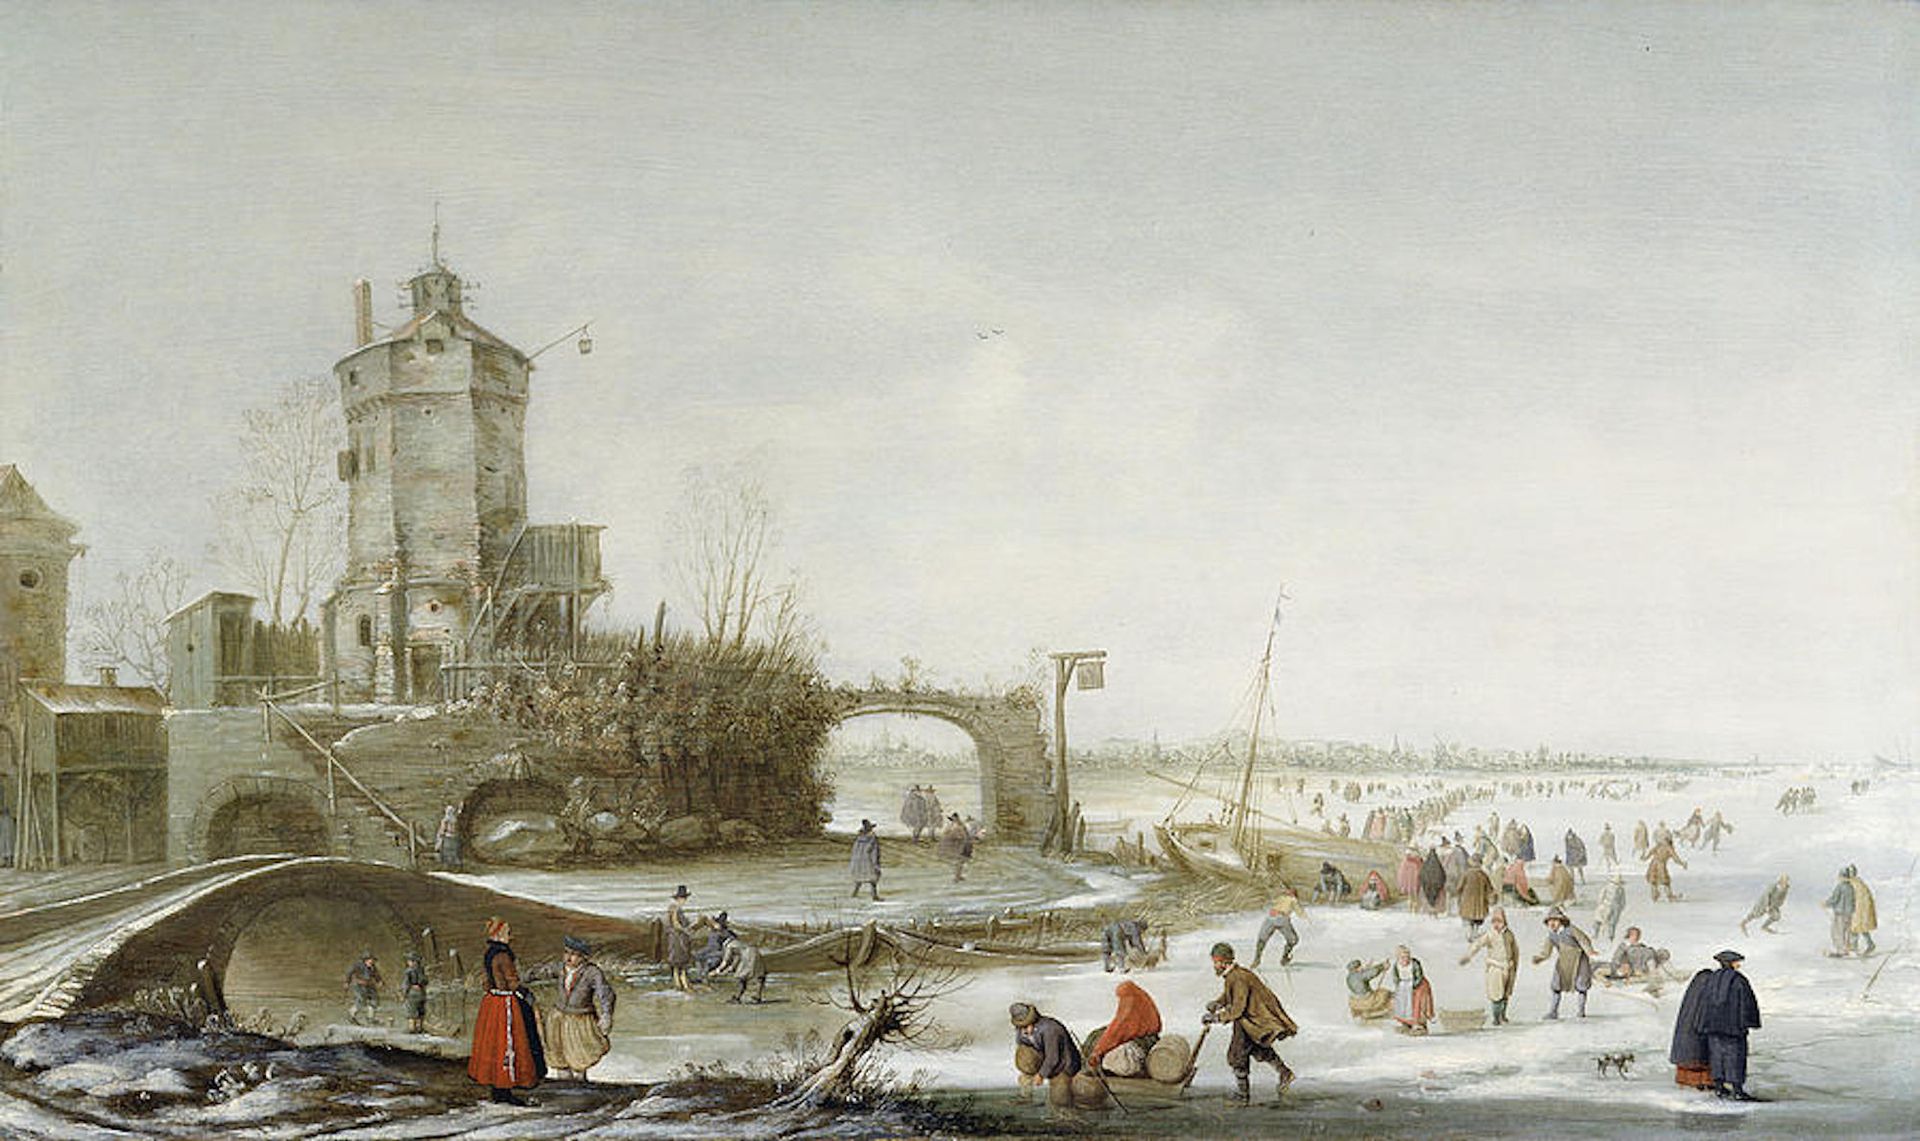 Hendrick Avercamp, Winter Landscape with Skater and Other Figures, 1630s Via Wikimedia Commons